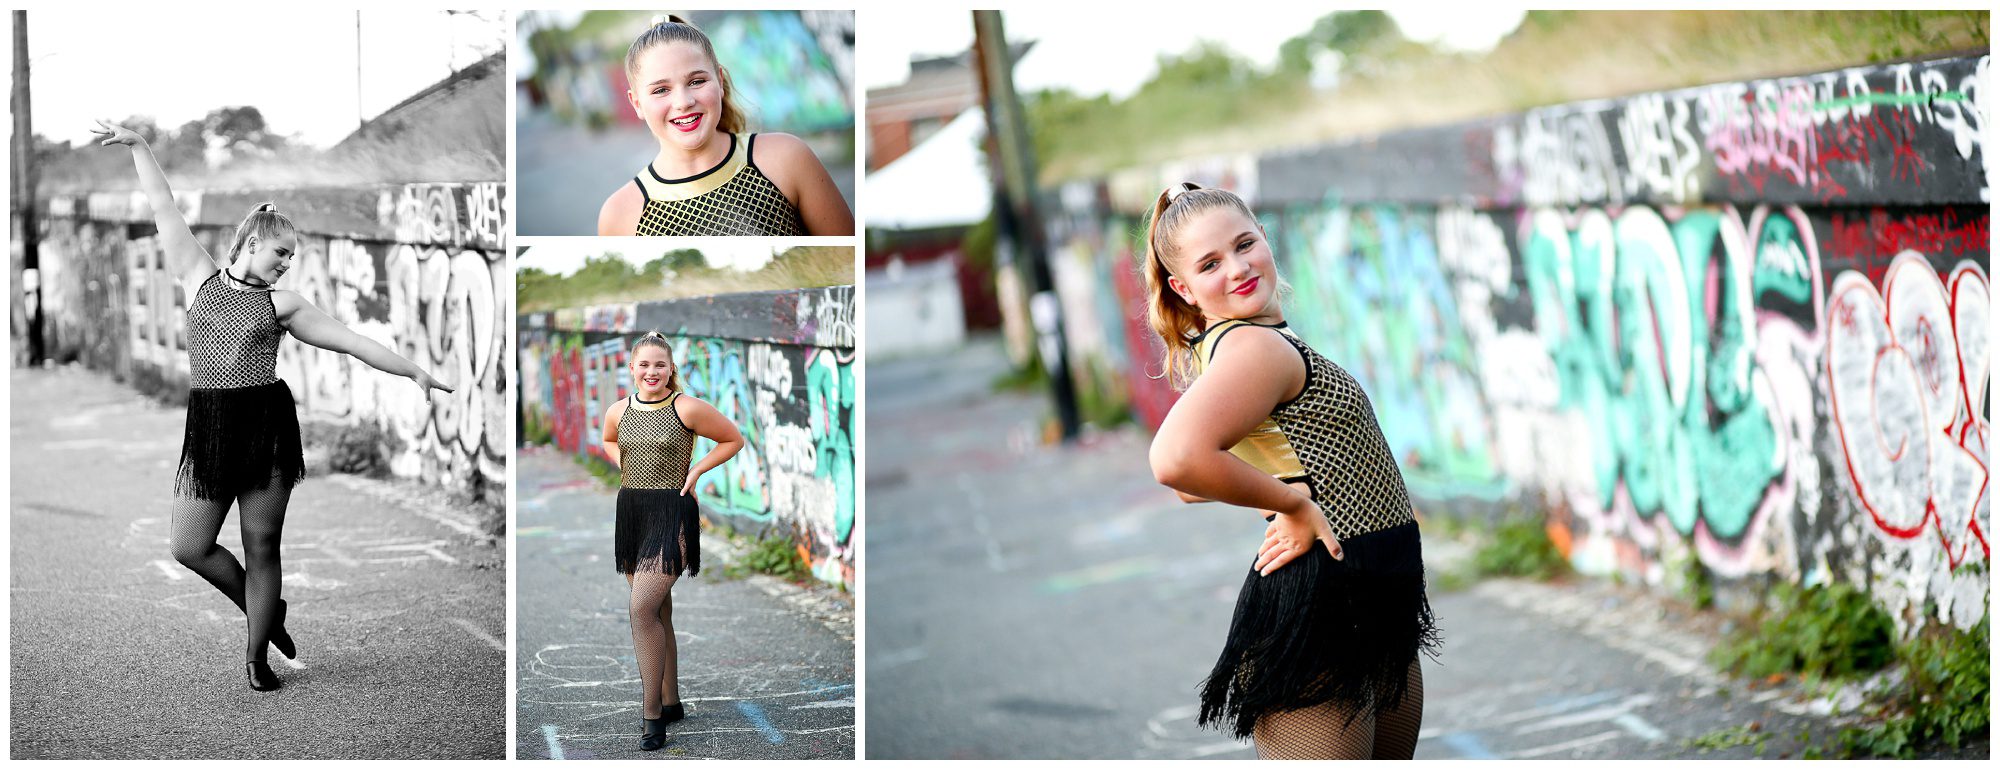 Fluvanna Jazz Dancer Spring Recital Portraits in Charlottesville Cville Photographer Photography session dance pictures costume urban downtown (2)